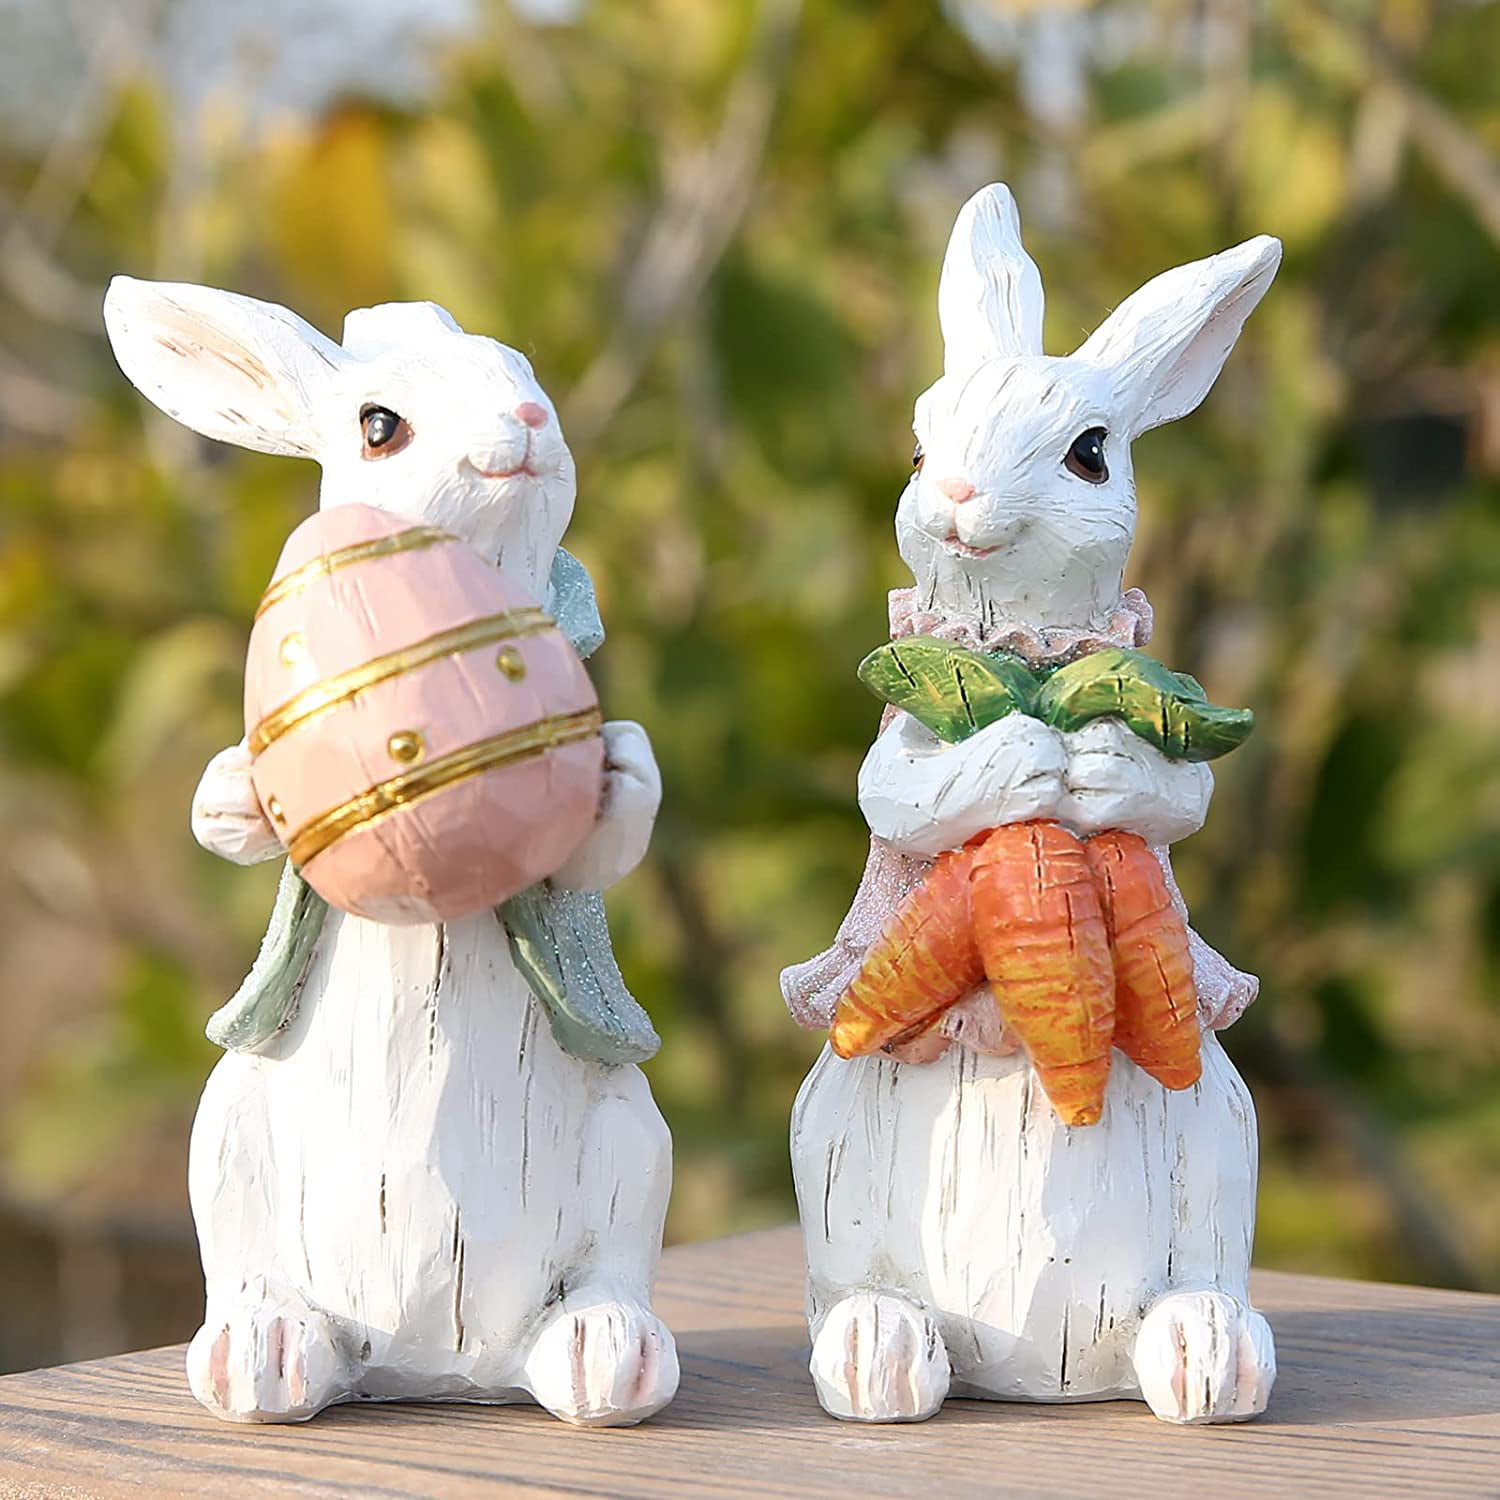 2022 New Home Ornament Modern Animal Craft Small Easter Bunny Statue Minimalist Holiday Art Unique Resin Gift Idea Easter Egg Sculpture